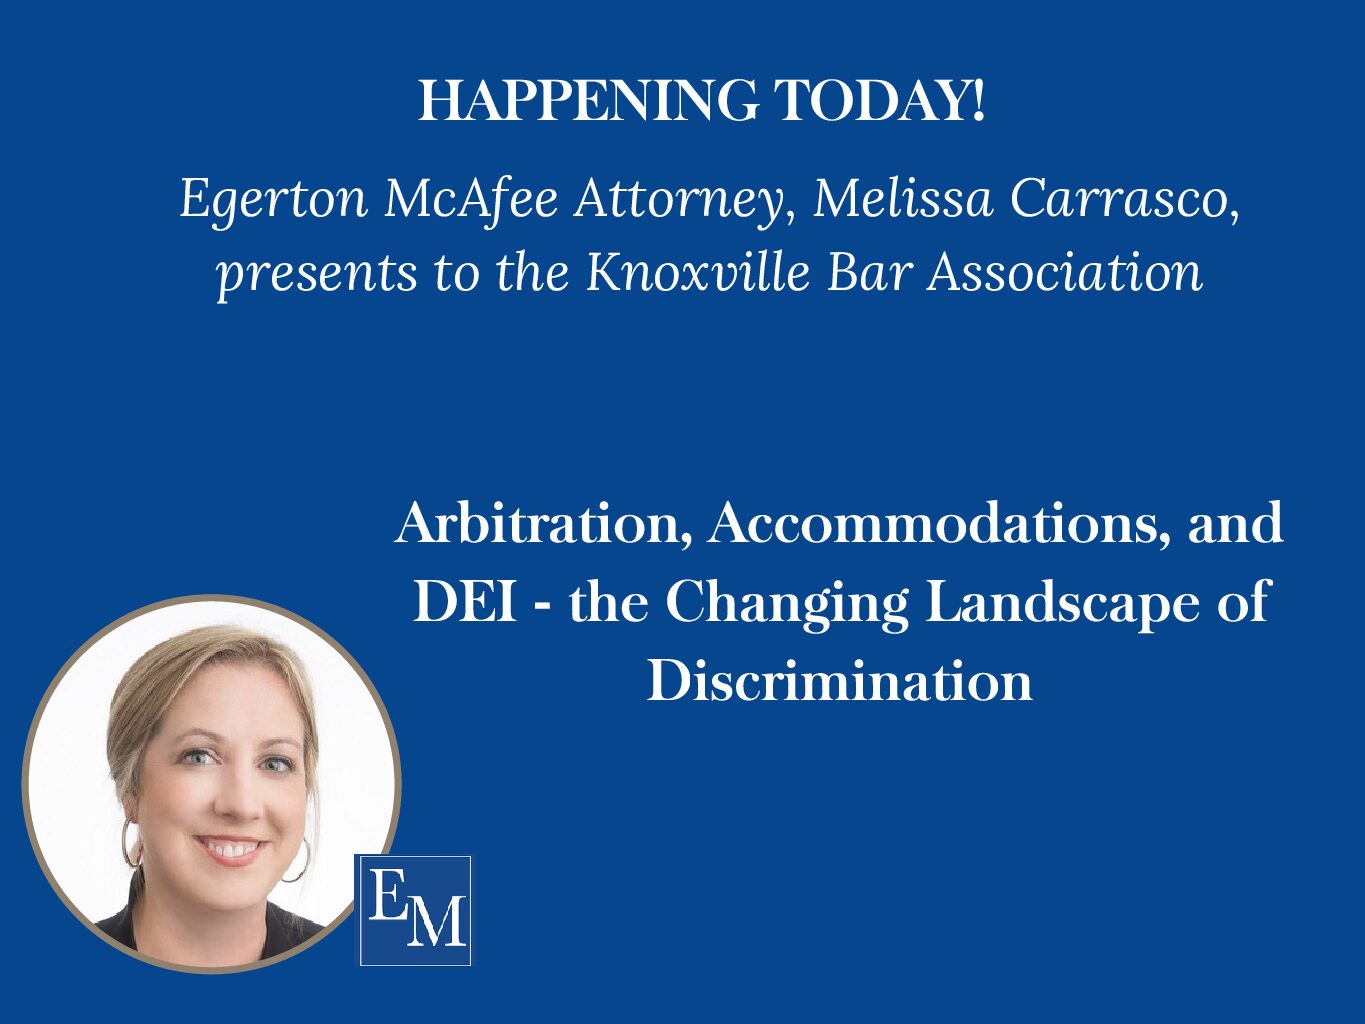 Melissa Carrasco Speaks to the Knoxville Bar Association – the Changing Landscape of Discrimination